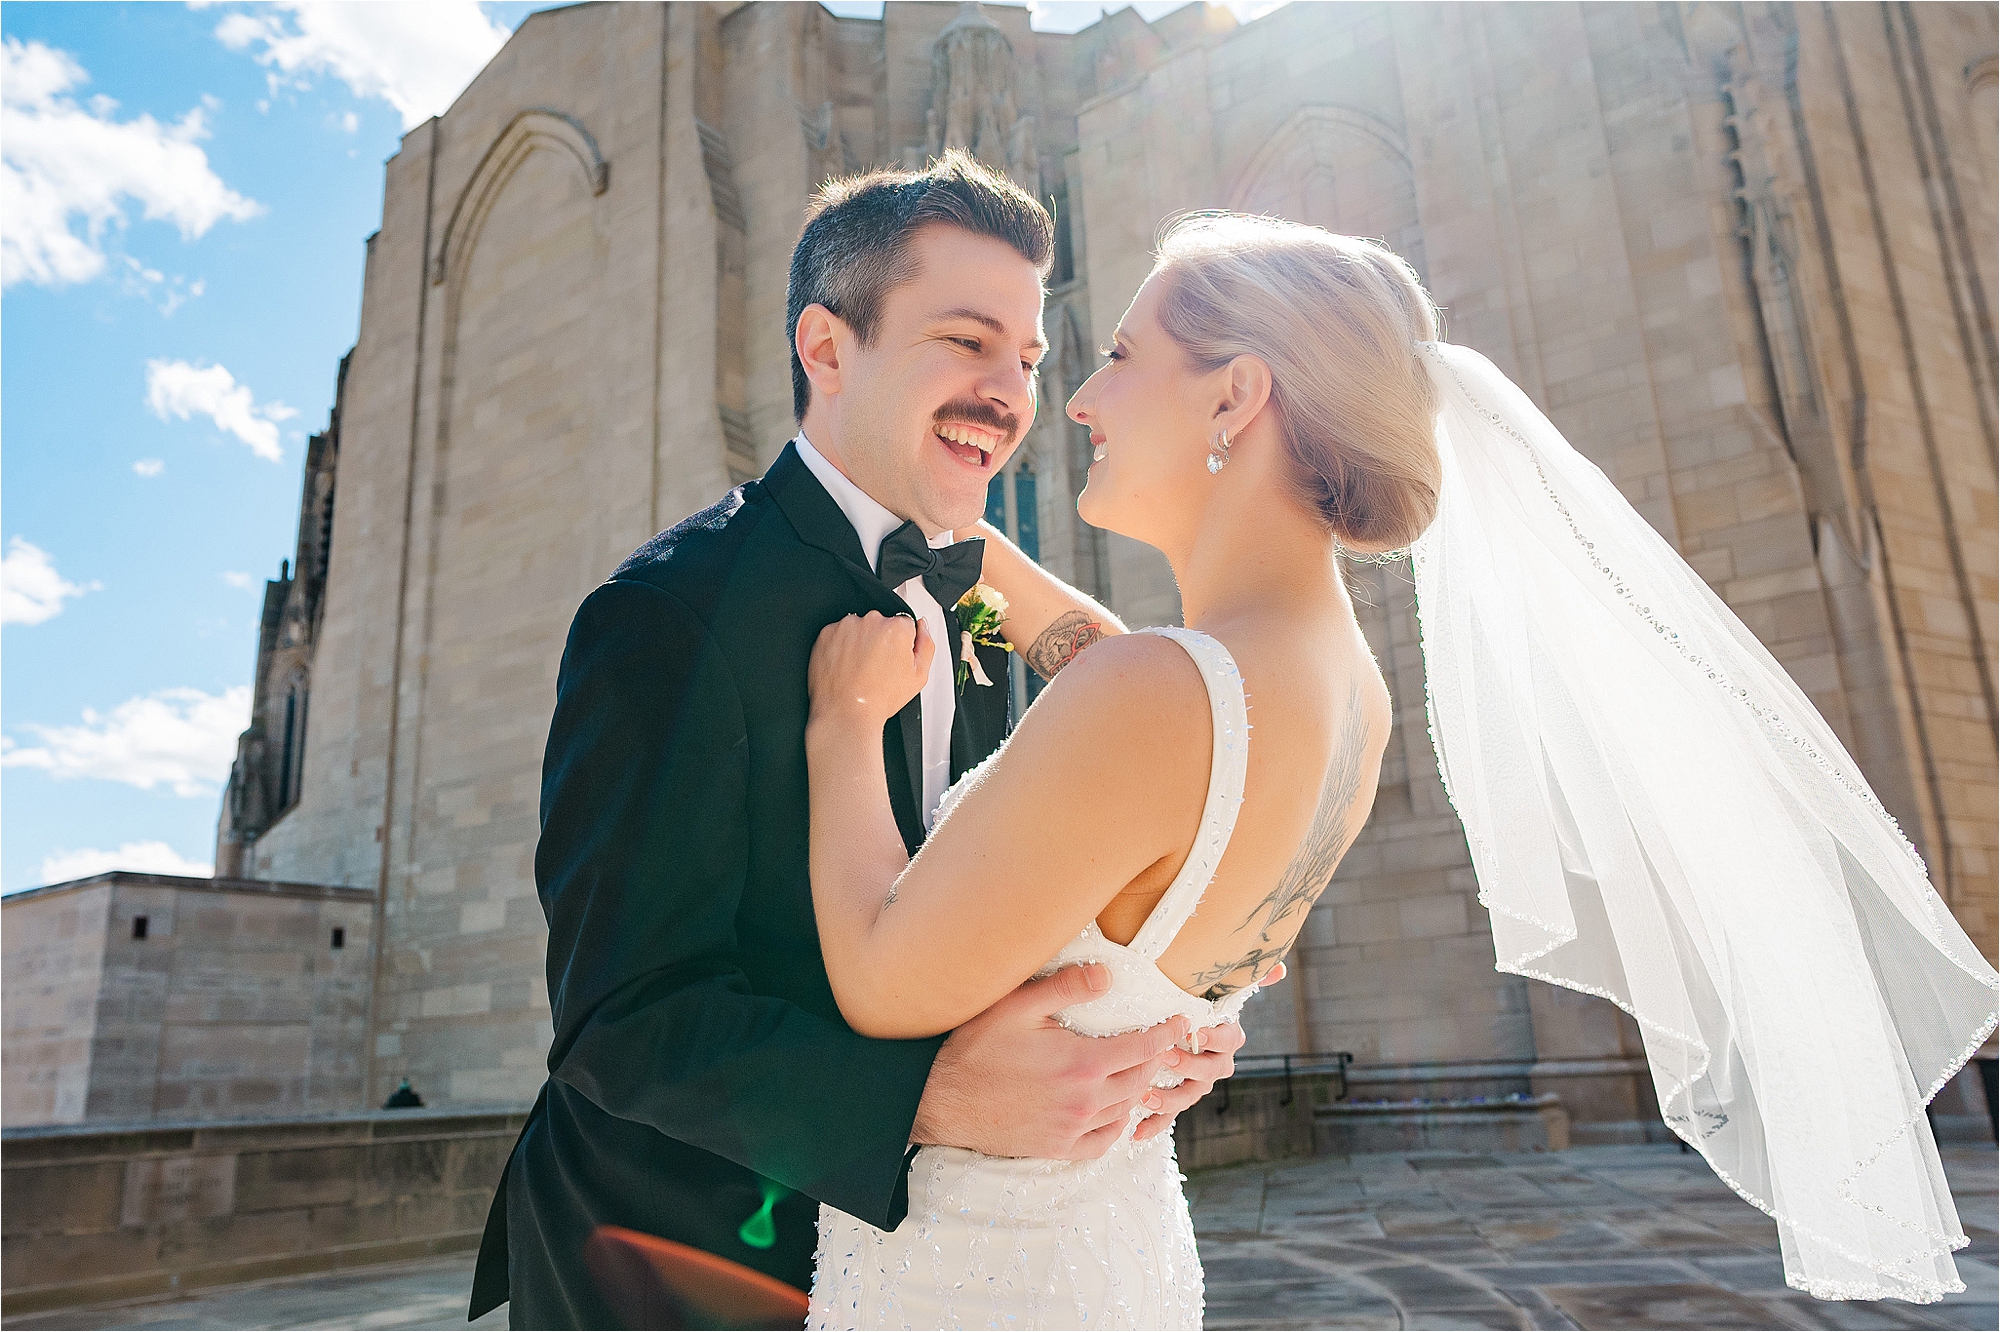 wedding photography outside of cathedral of learning • Soldiers and Sailors Memorial Hall Wedding Photos